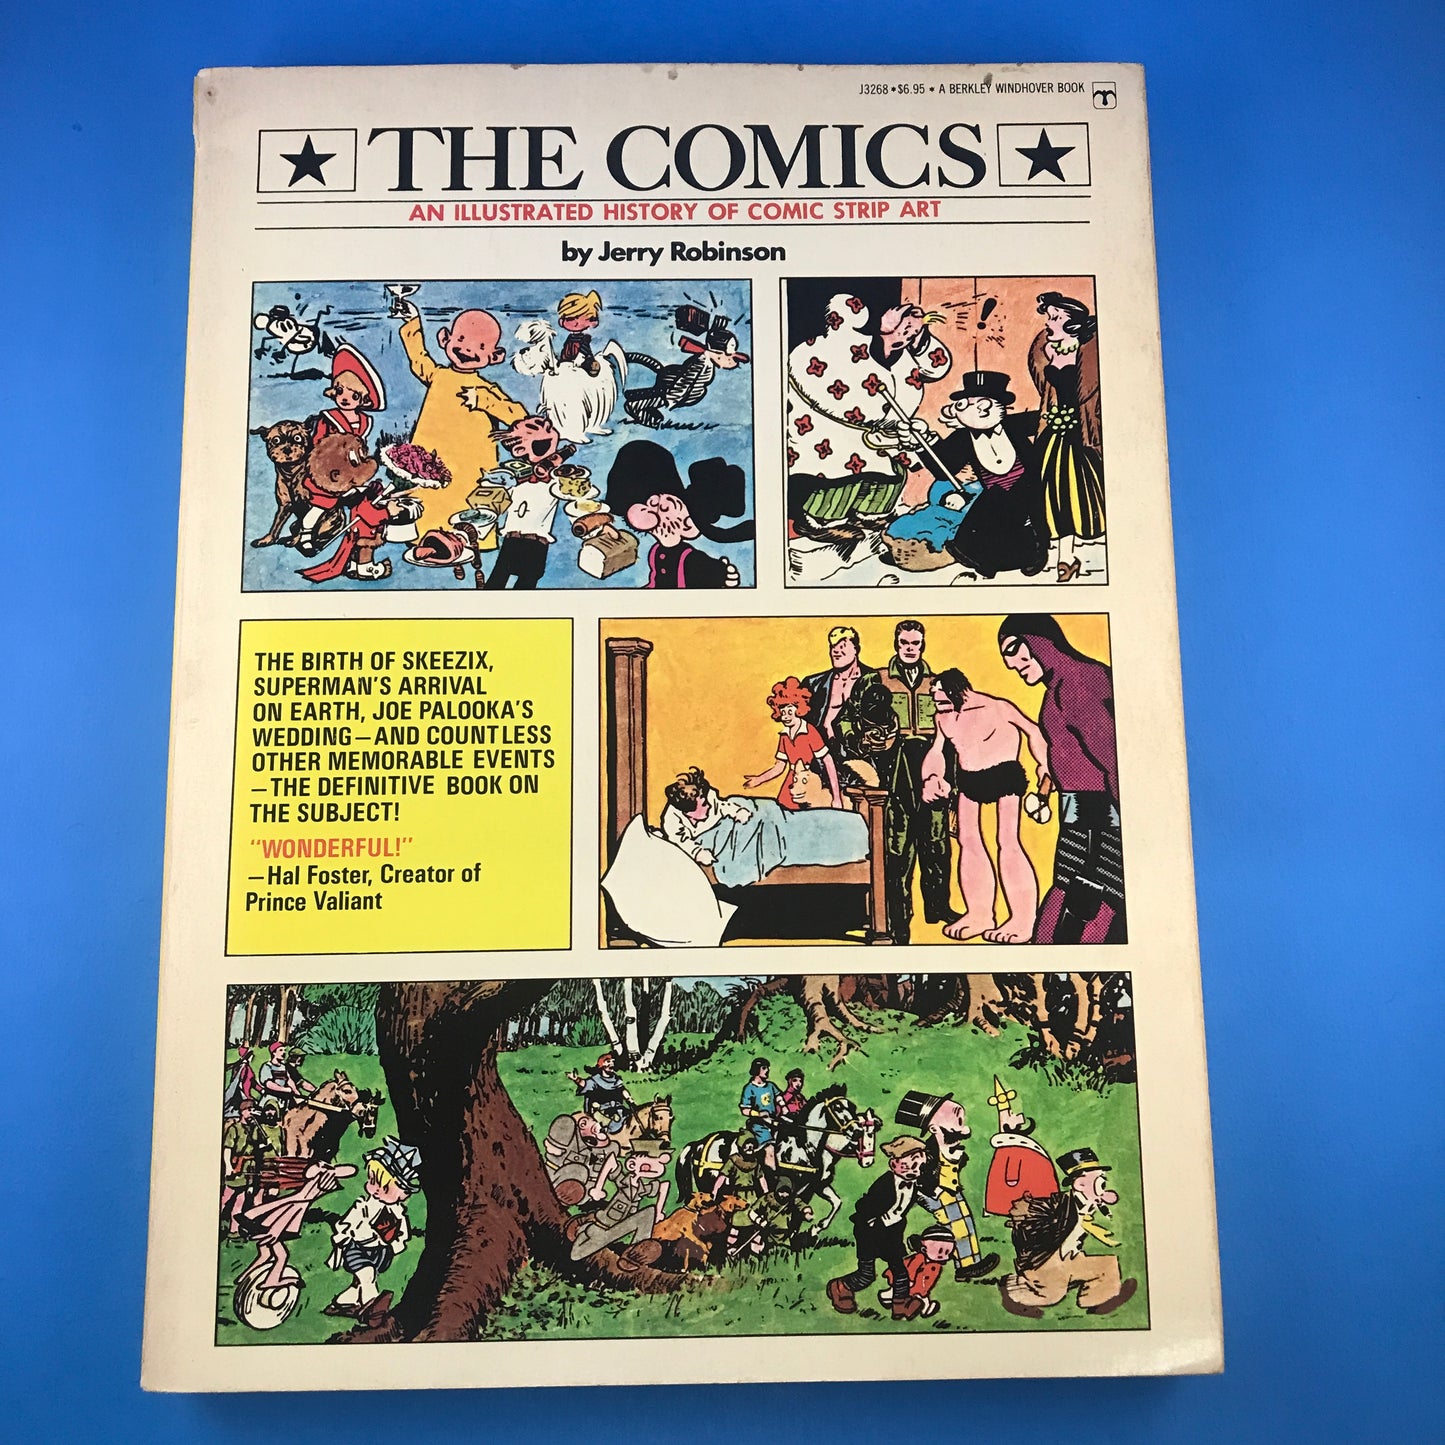 The Comics: An Illustrated History of Comic Strip Art